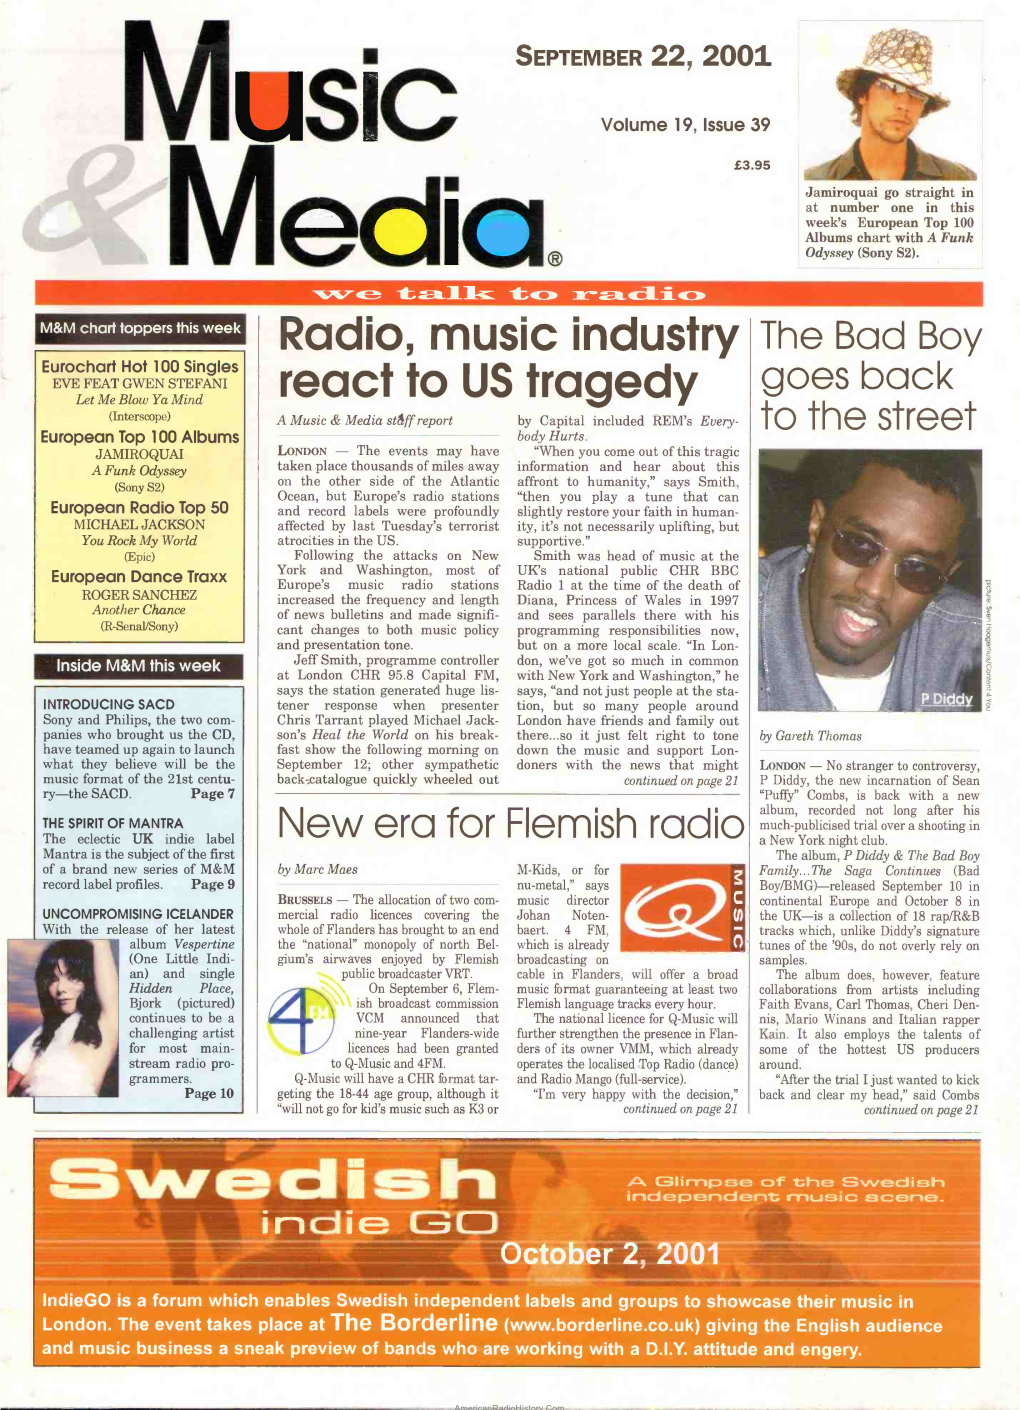 !Lbwoak Ihi Independent Musiccer-Ike October 2, 2001 Tndiego Is a Forum Which Enables Swedish Independent Labels and Groups to Showcase Their Music in Ondon